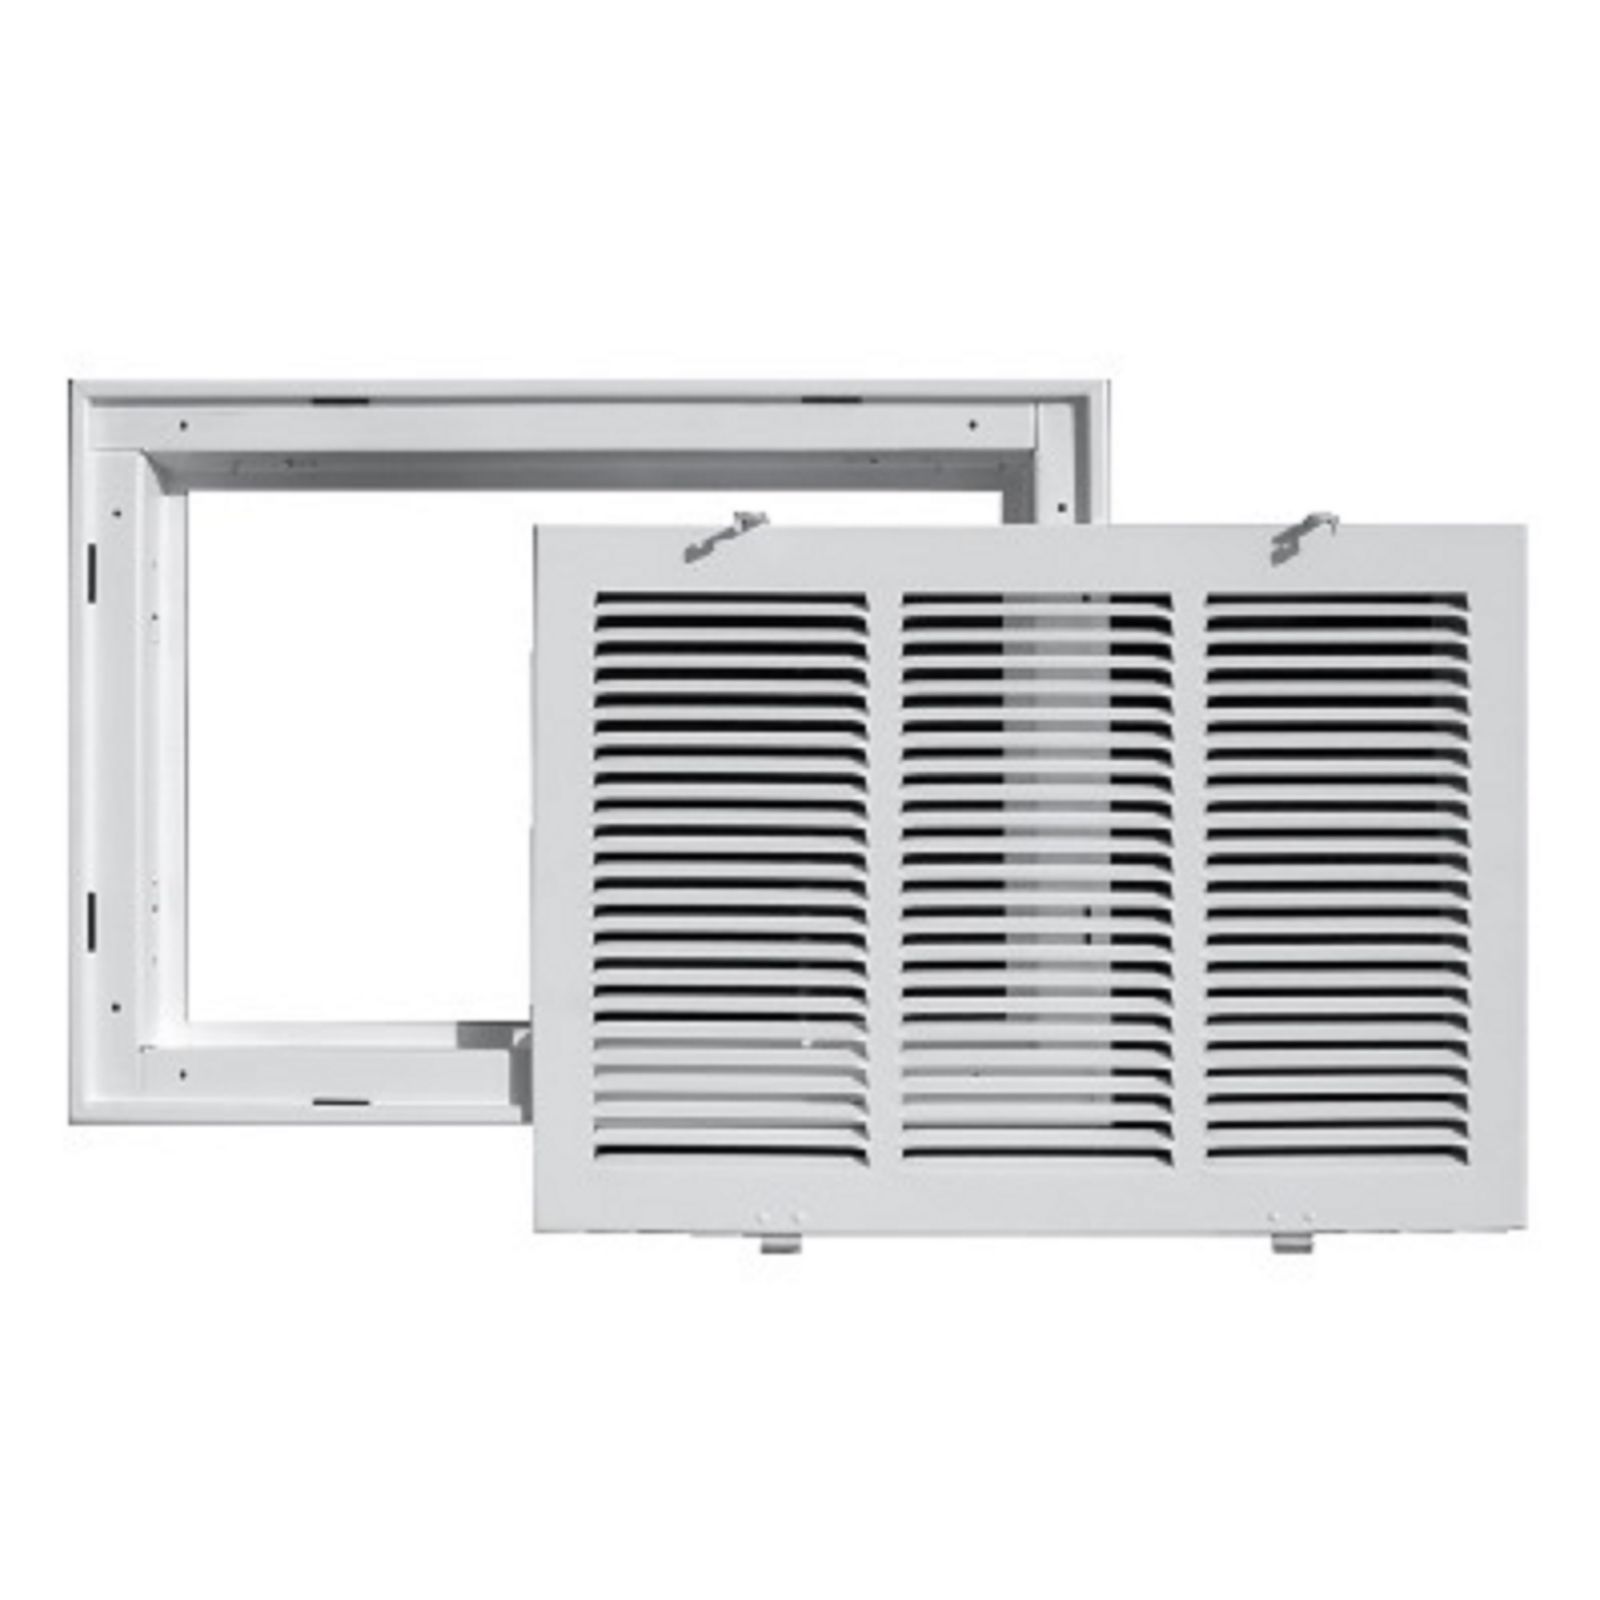 TRUaire 190RF 20X14 - Steel Return Air Filter Grille With Removable Face, White, 20" X 14"